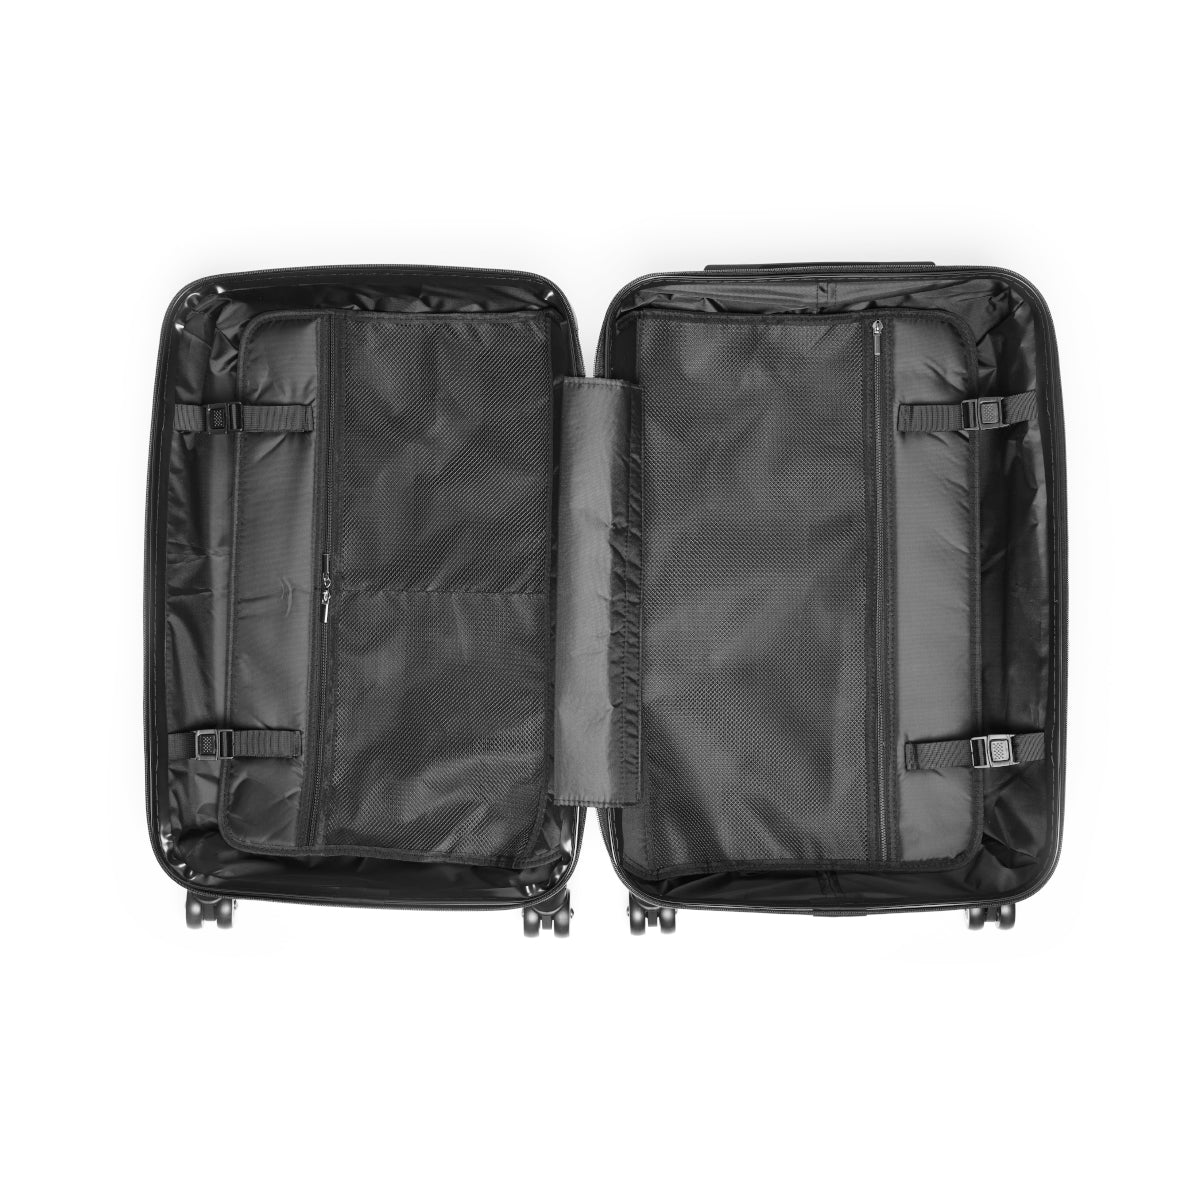 Getrott Miles Davis Bitches Brew 1969 Black Cabin Suitcase Inner Pockets Extended Storage Adjustable Telescopic Handle Inner Pockets Double wheeled Polycarbonate Hard-shell Built-in Lock